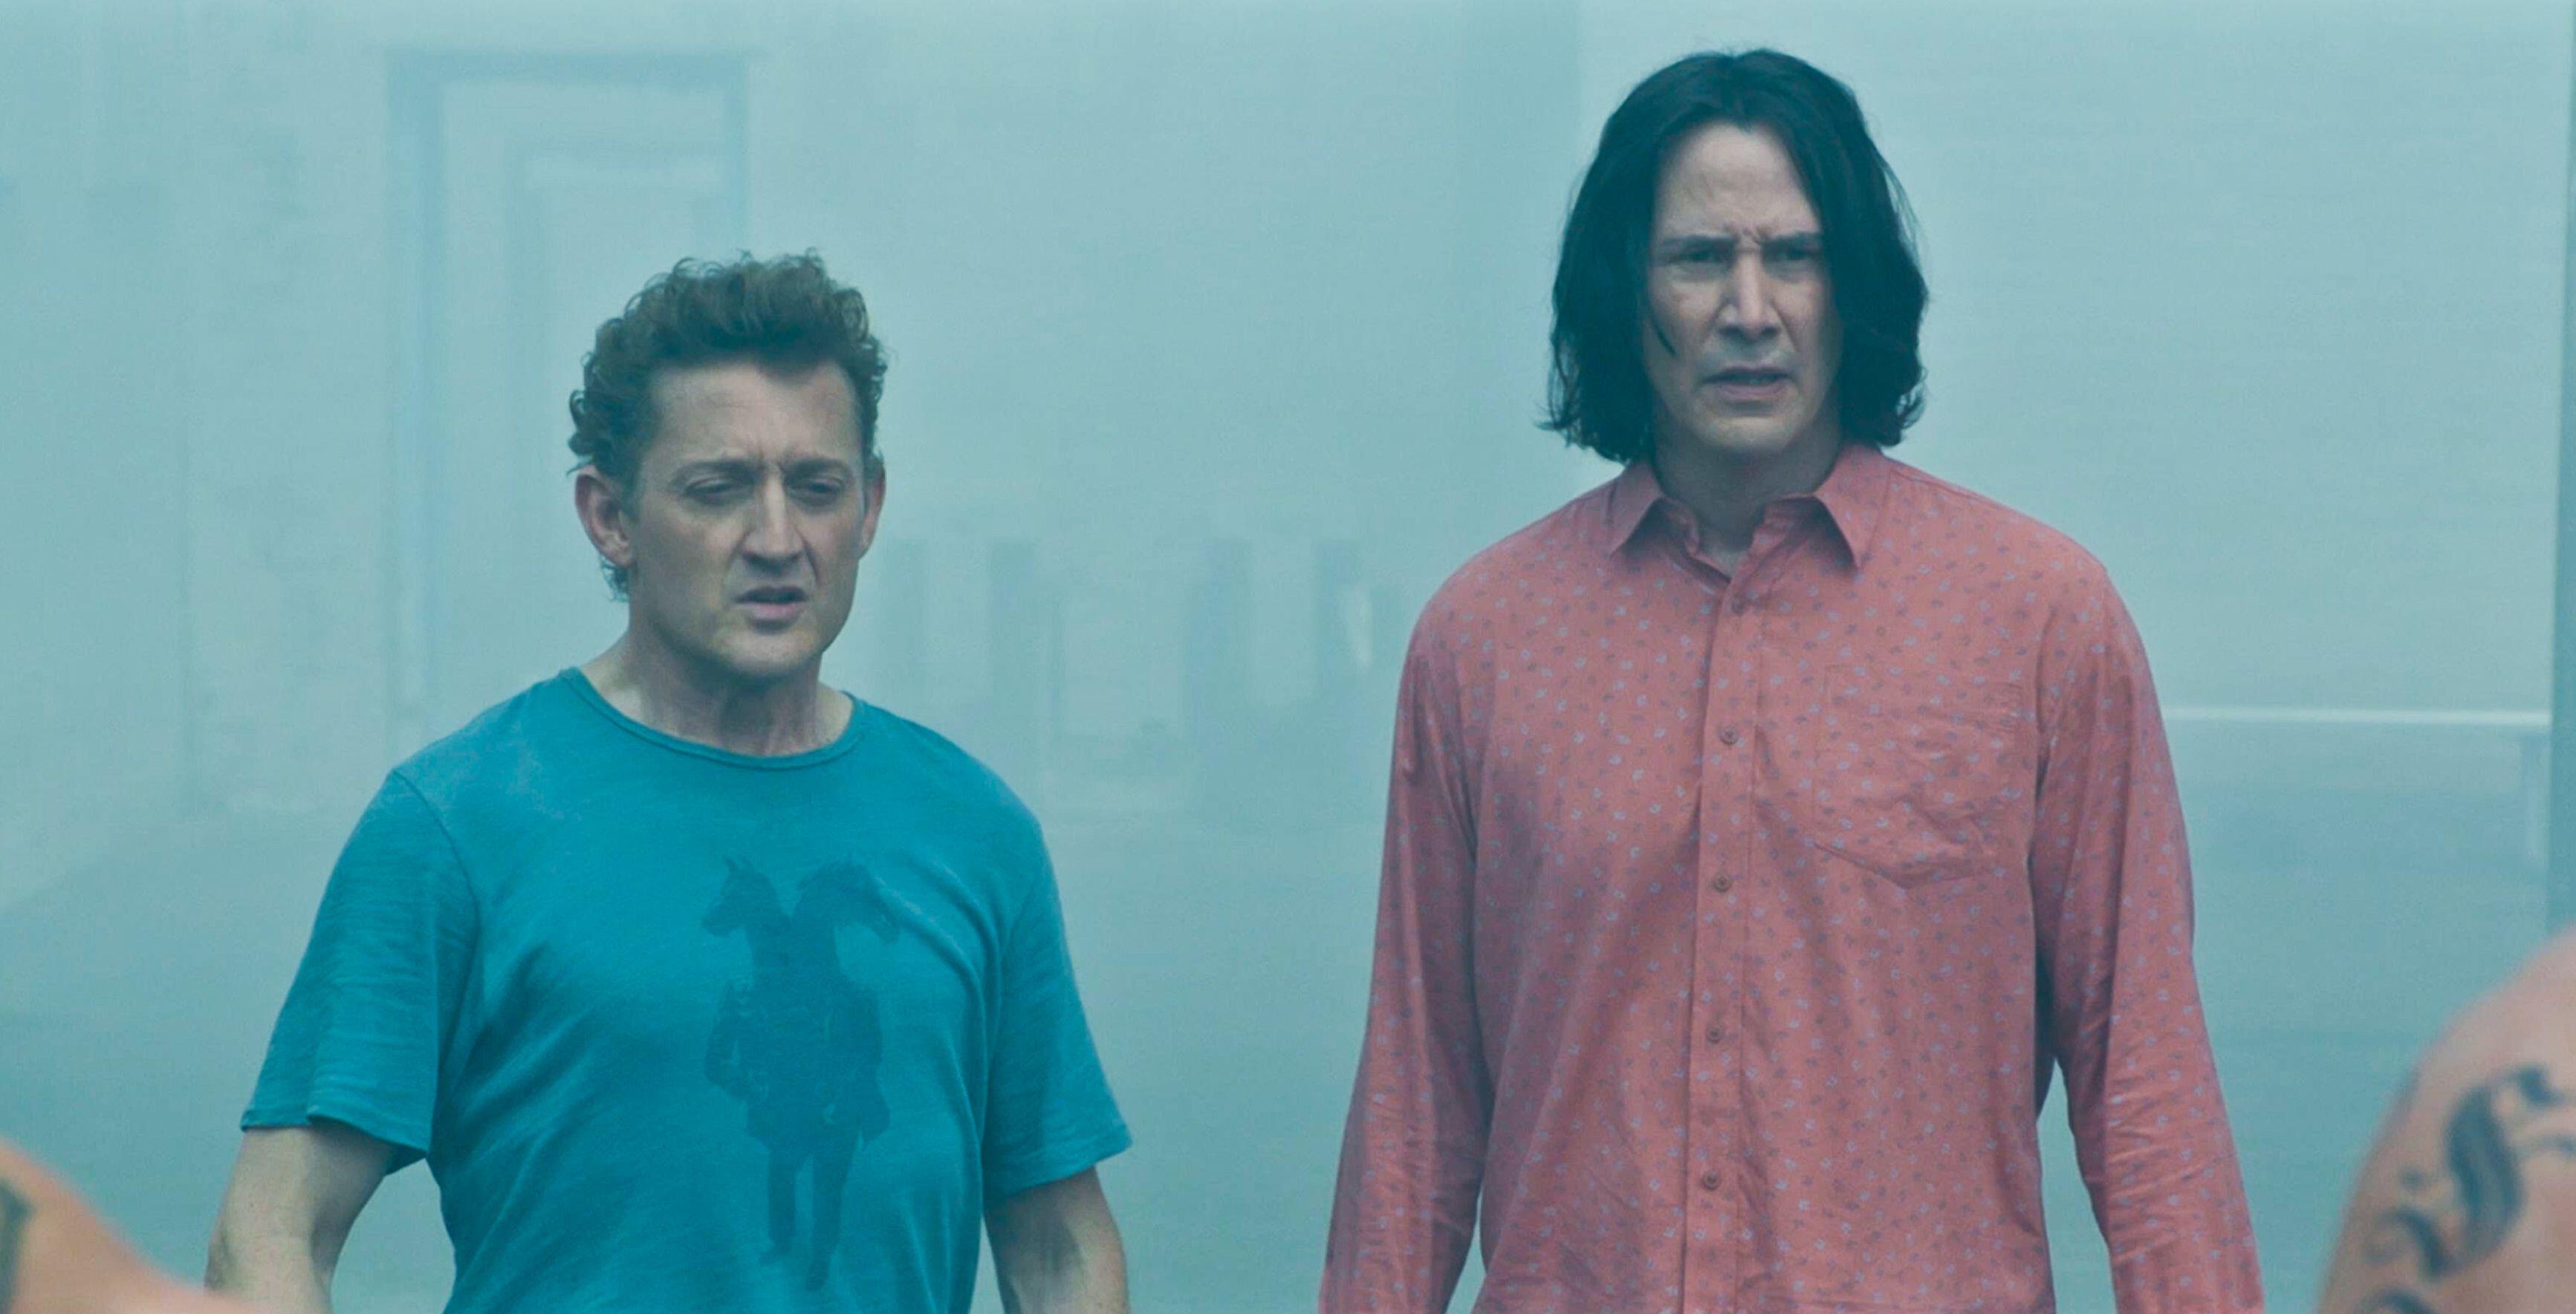 Keanu Reeves and Alex Winter were spotted in their Bill and Ted costumes as they begin filming Bill & Ted Face the Music that was released in 2020